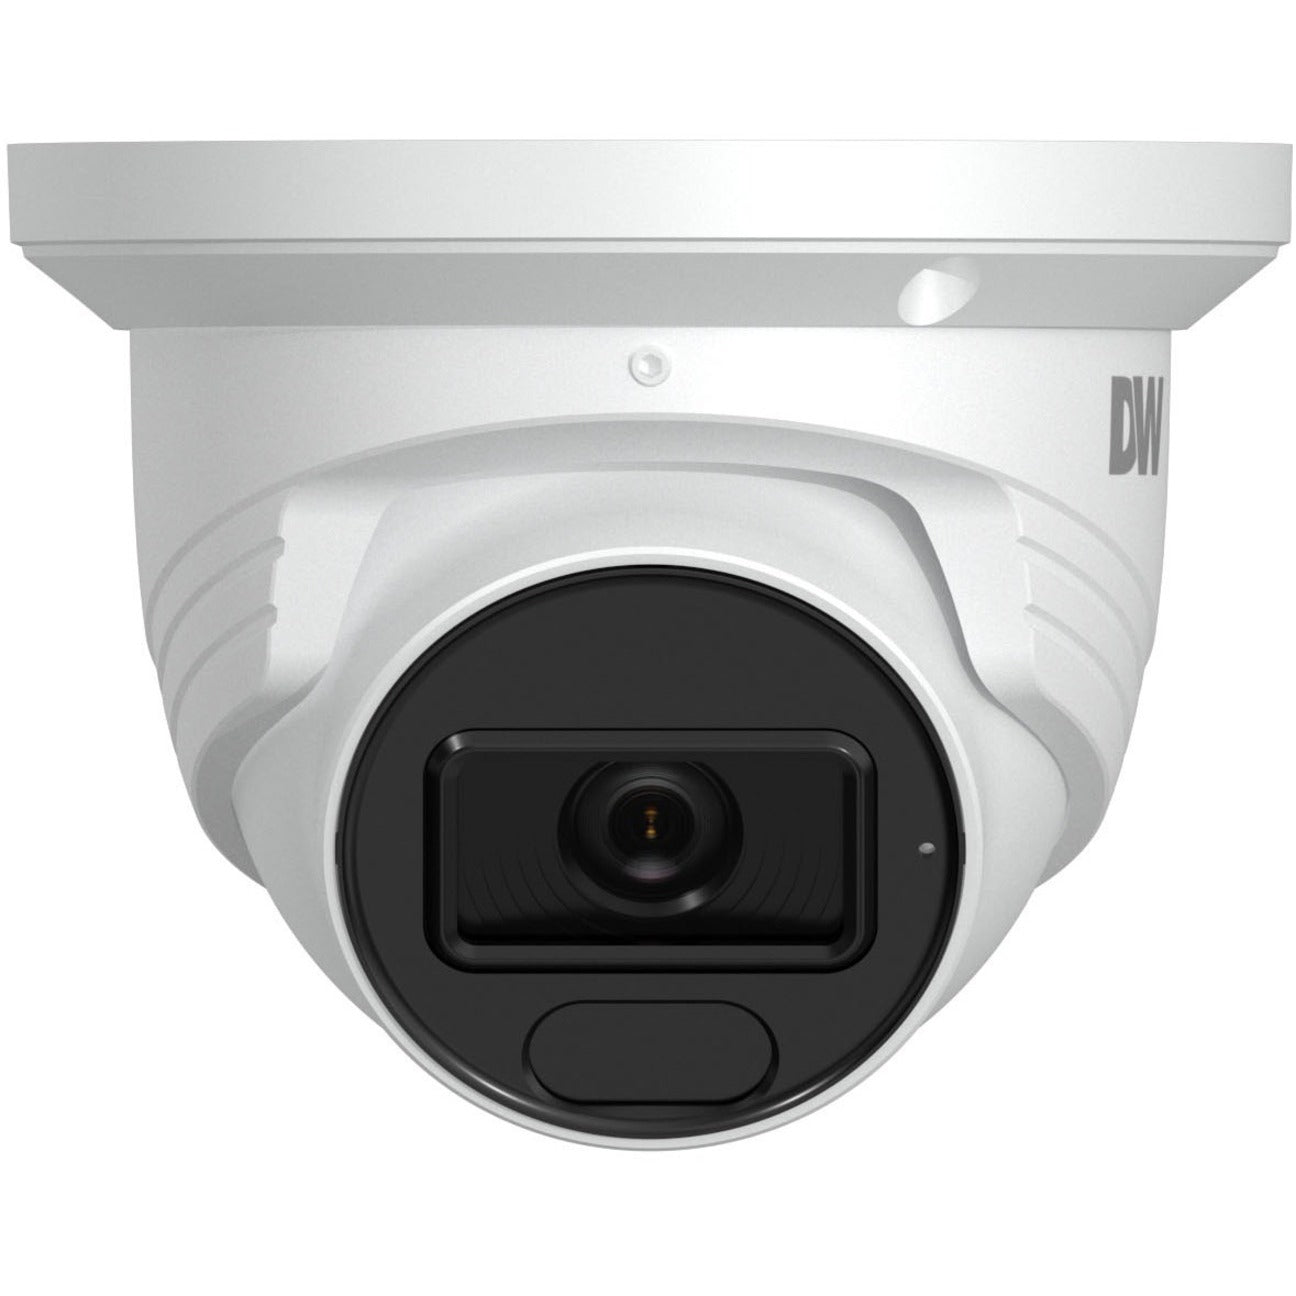 Digital Watchdog DWC-MT95WI36TW MEGApix 5MP Turret IP Camera with Fixed Lens Options and IR, 100 ft Night Vision